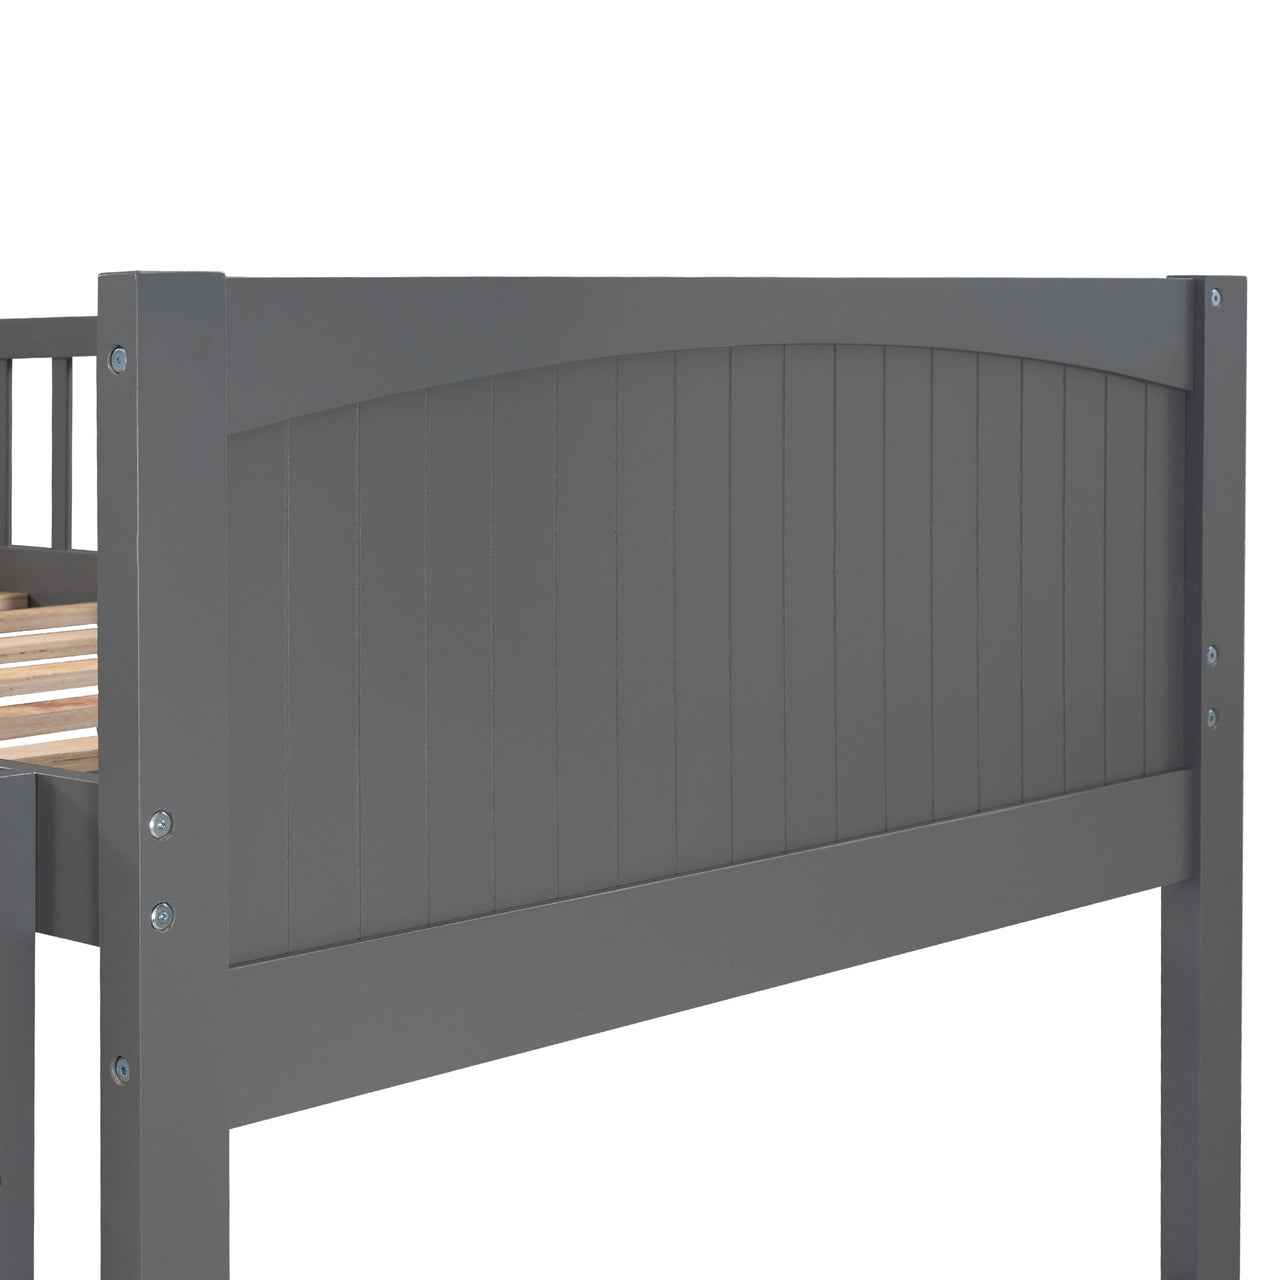 Gray Twin Bunk Bed with Drawers - Casatrail.com